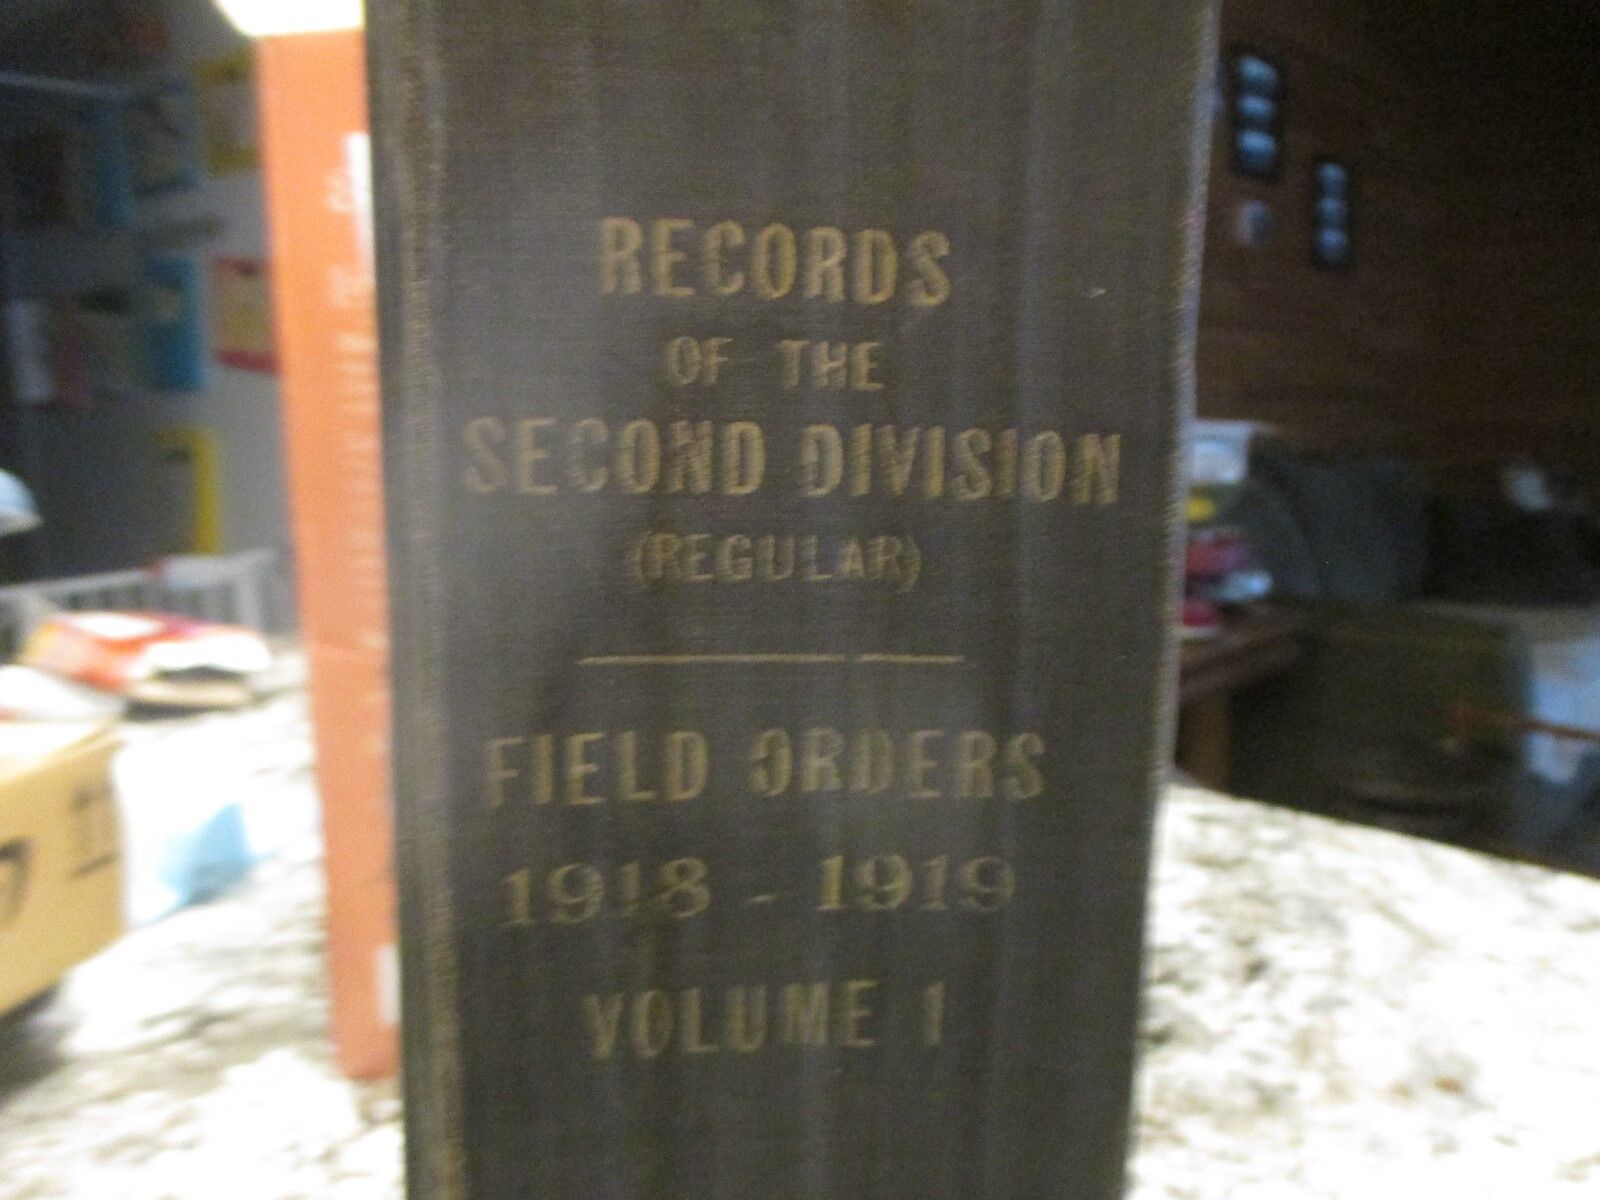 WW1 Records of the 2nd Div, Field Orders 1918-1919 Vol 1  